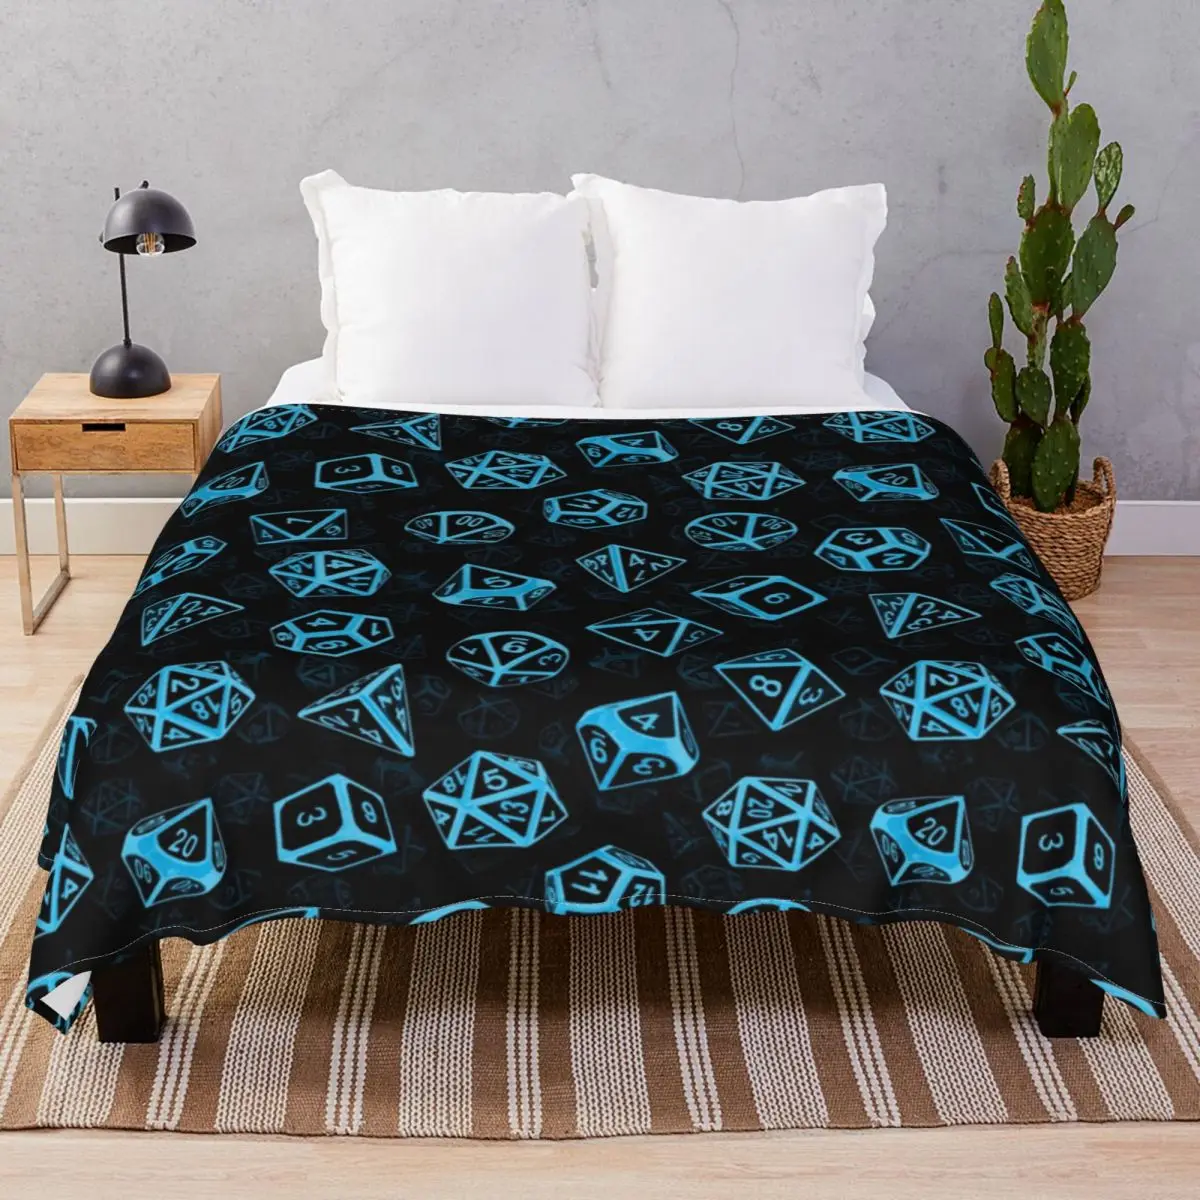 D20 Dice Set Pattern Blue Blanket Fleece Decoration Super Warm Throw Blankets for Bedding Home Couch Camp Cinema